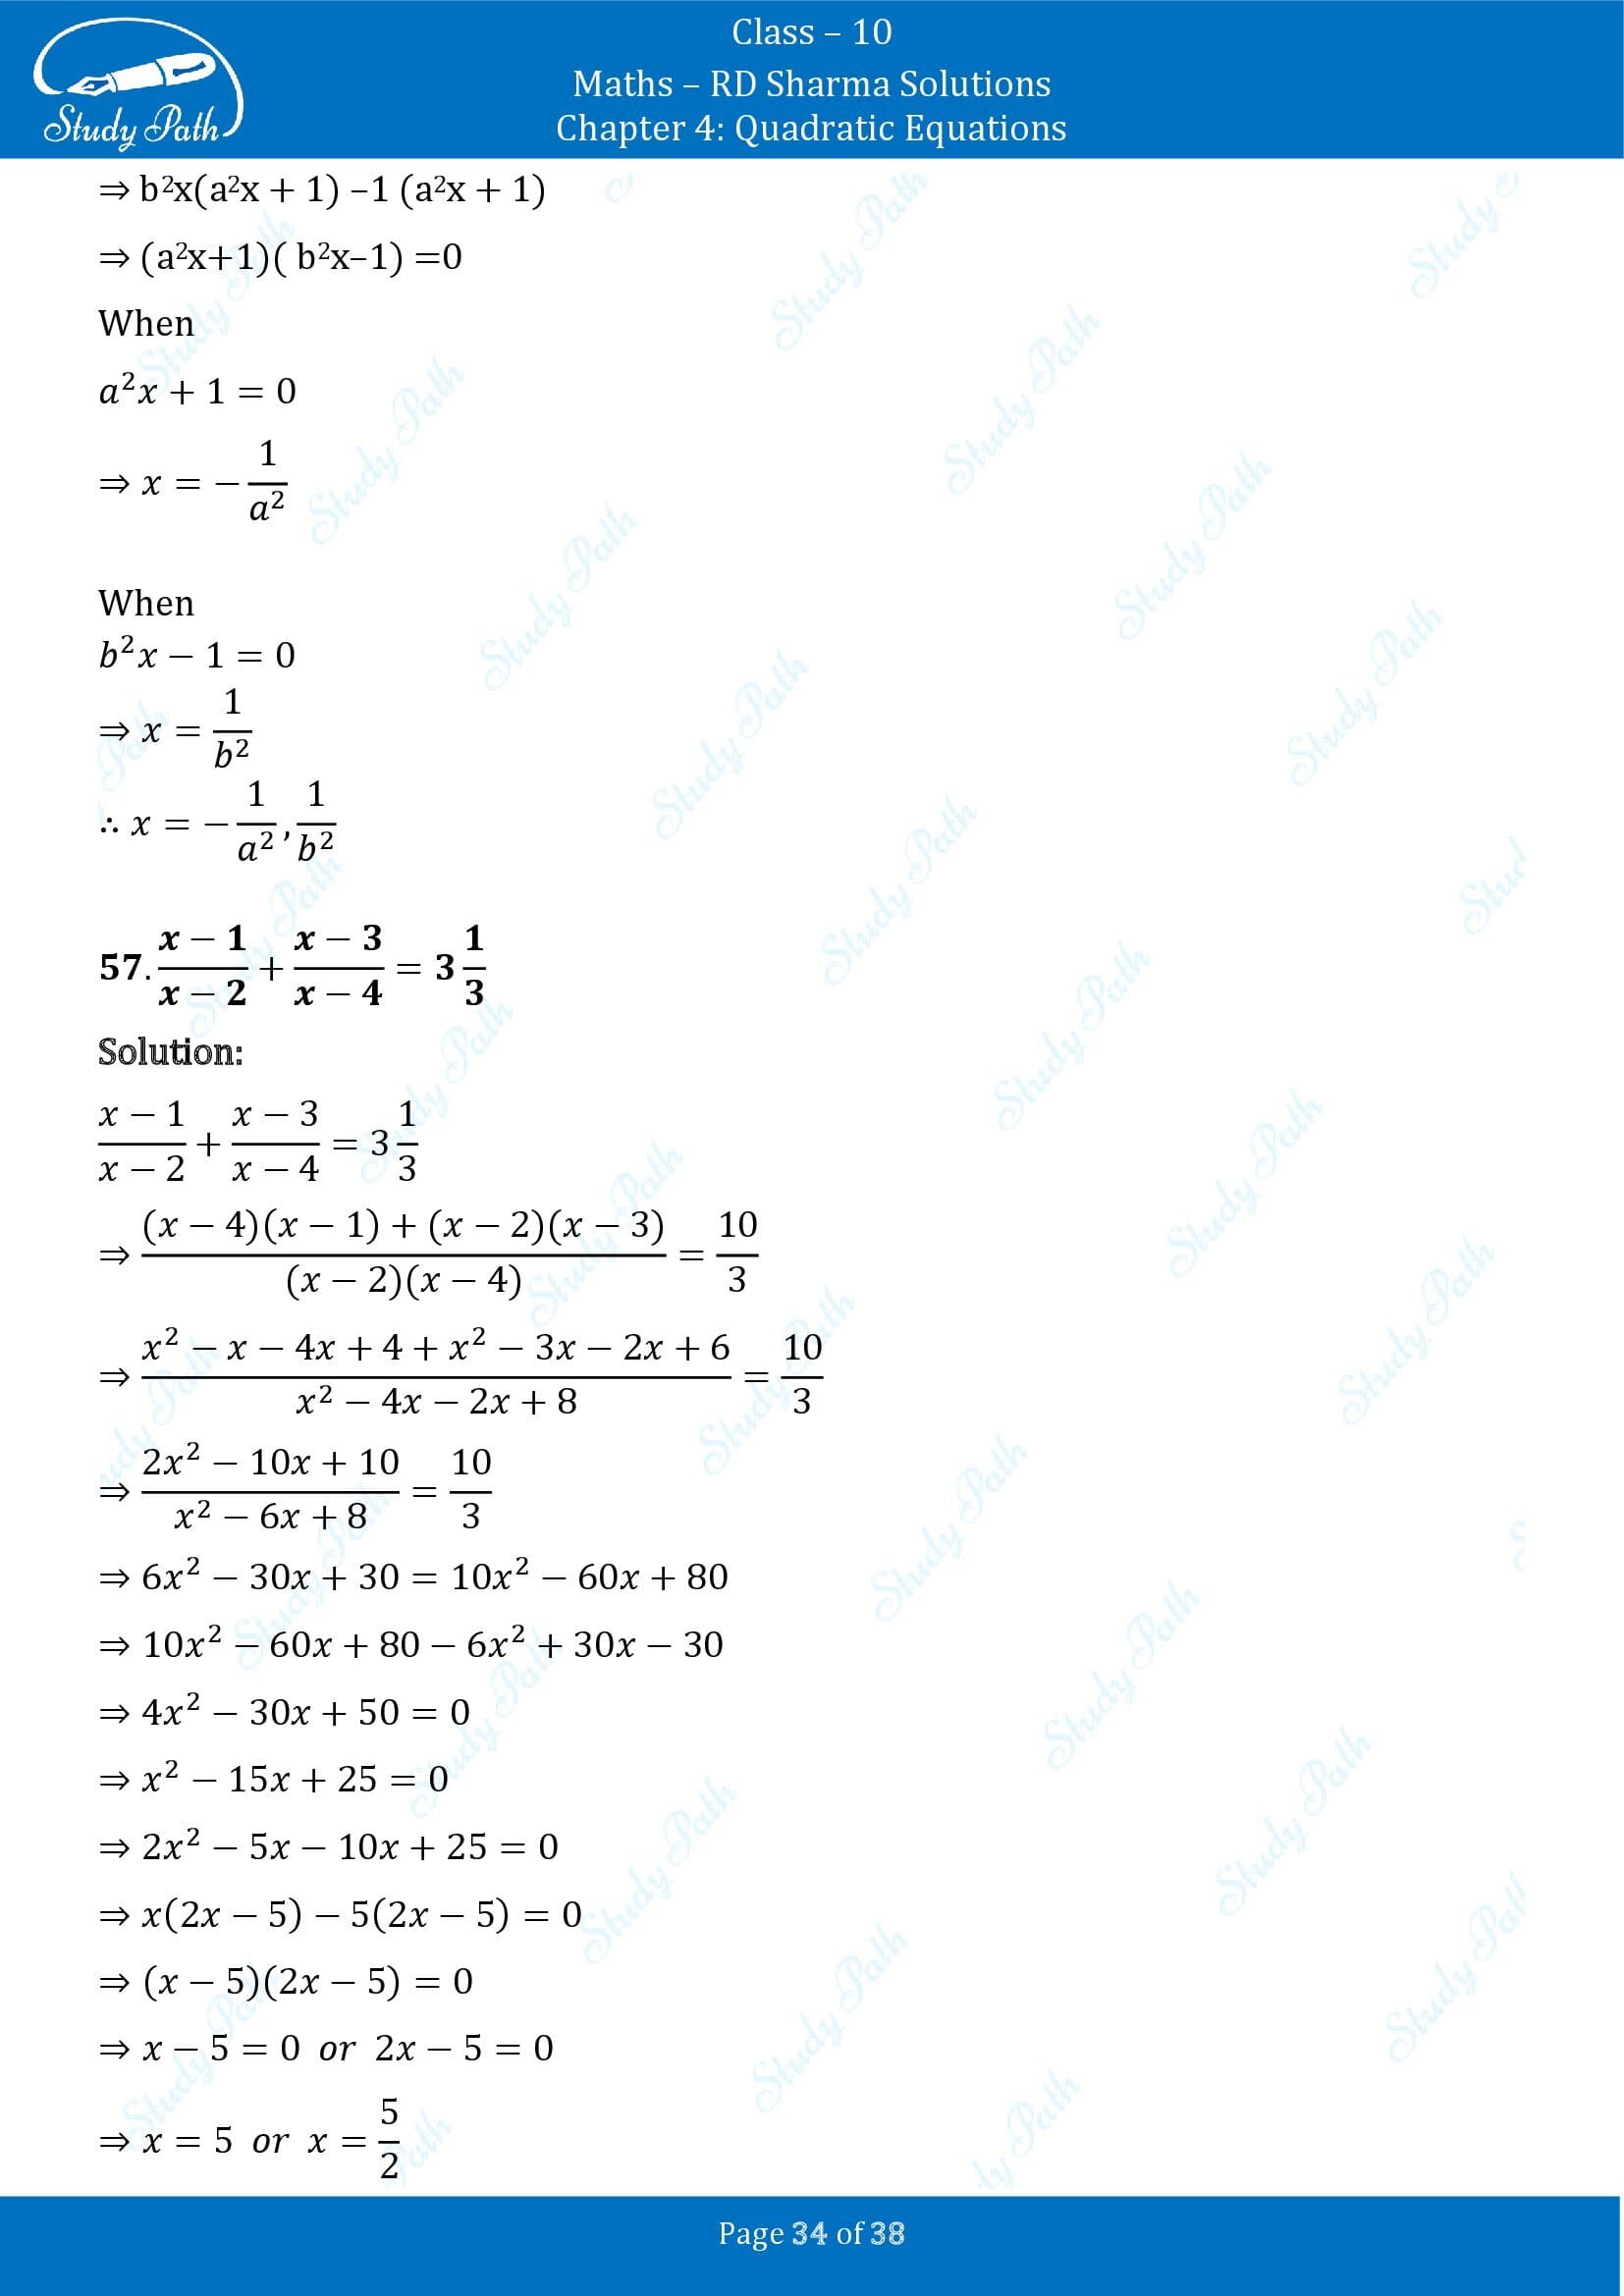 RD Sharma Solutions Class 10 Chapter 4 Quadratic Equations Exercise 4.3 00034